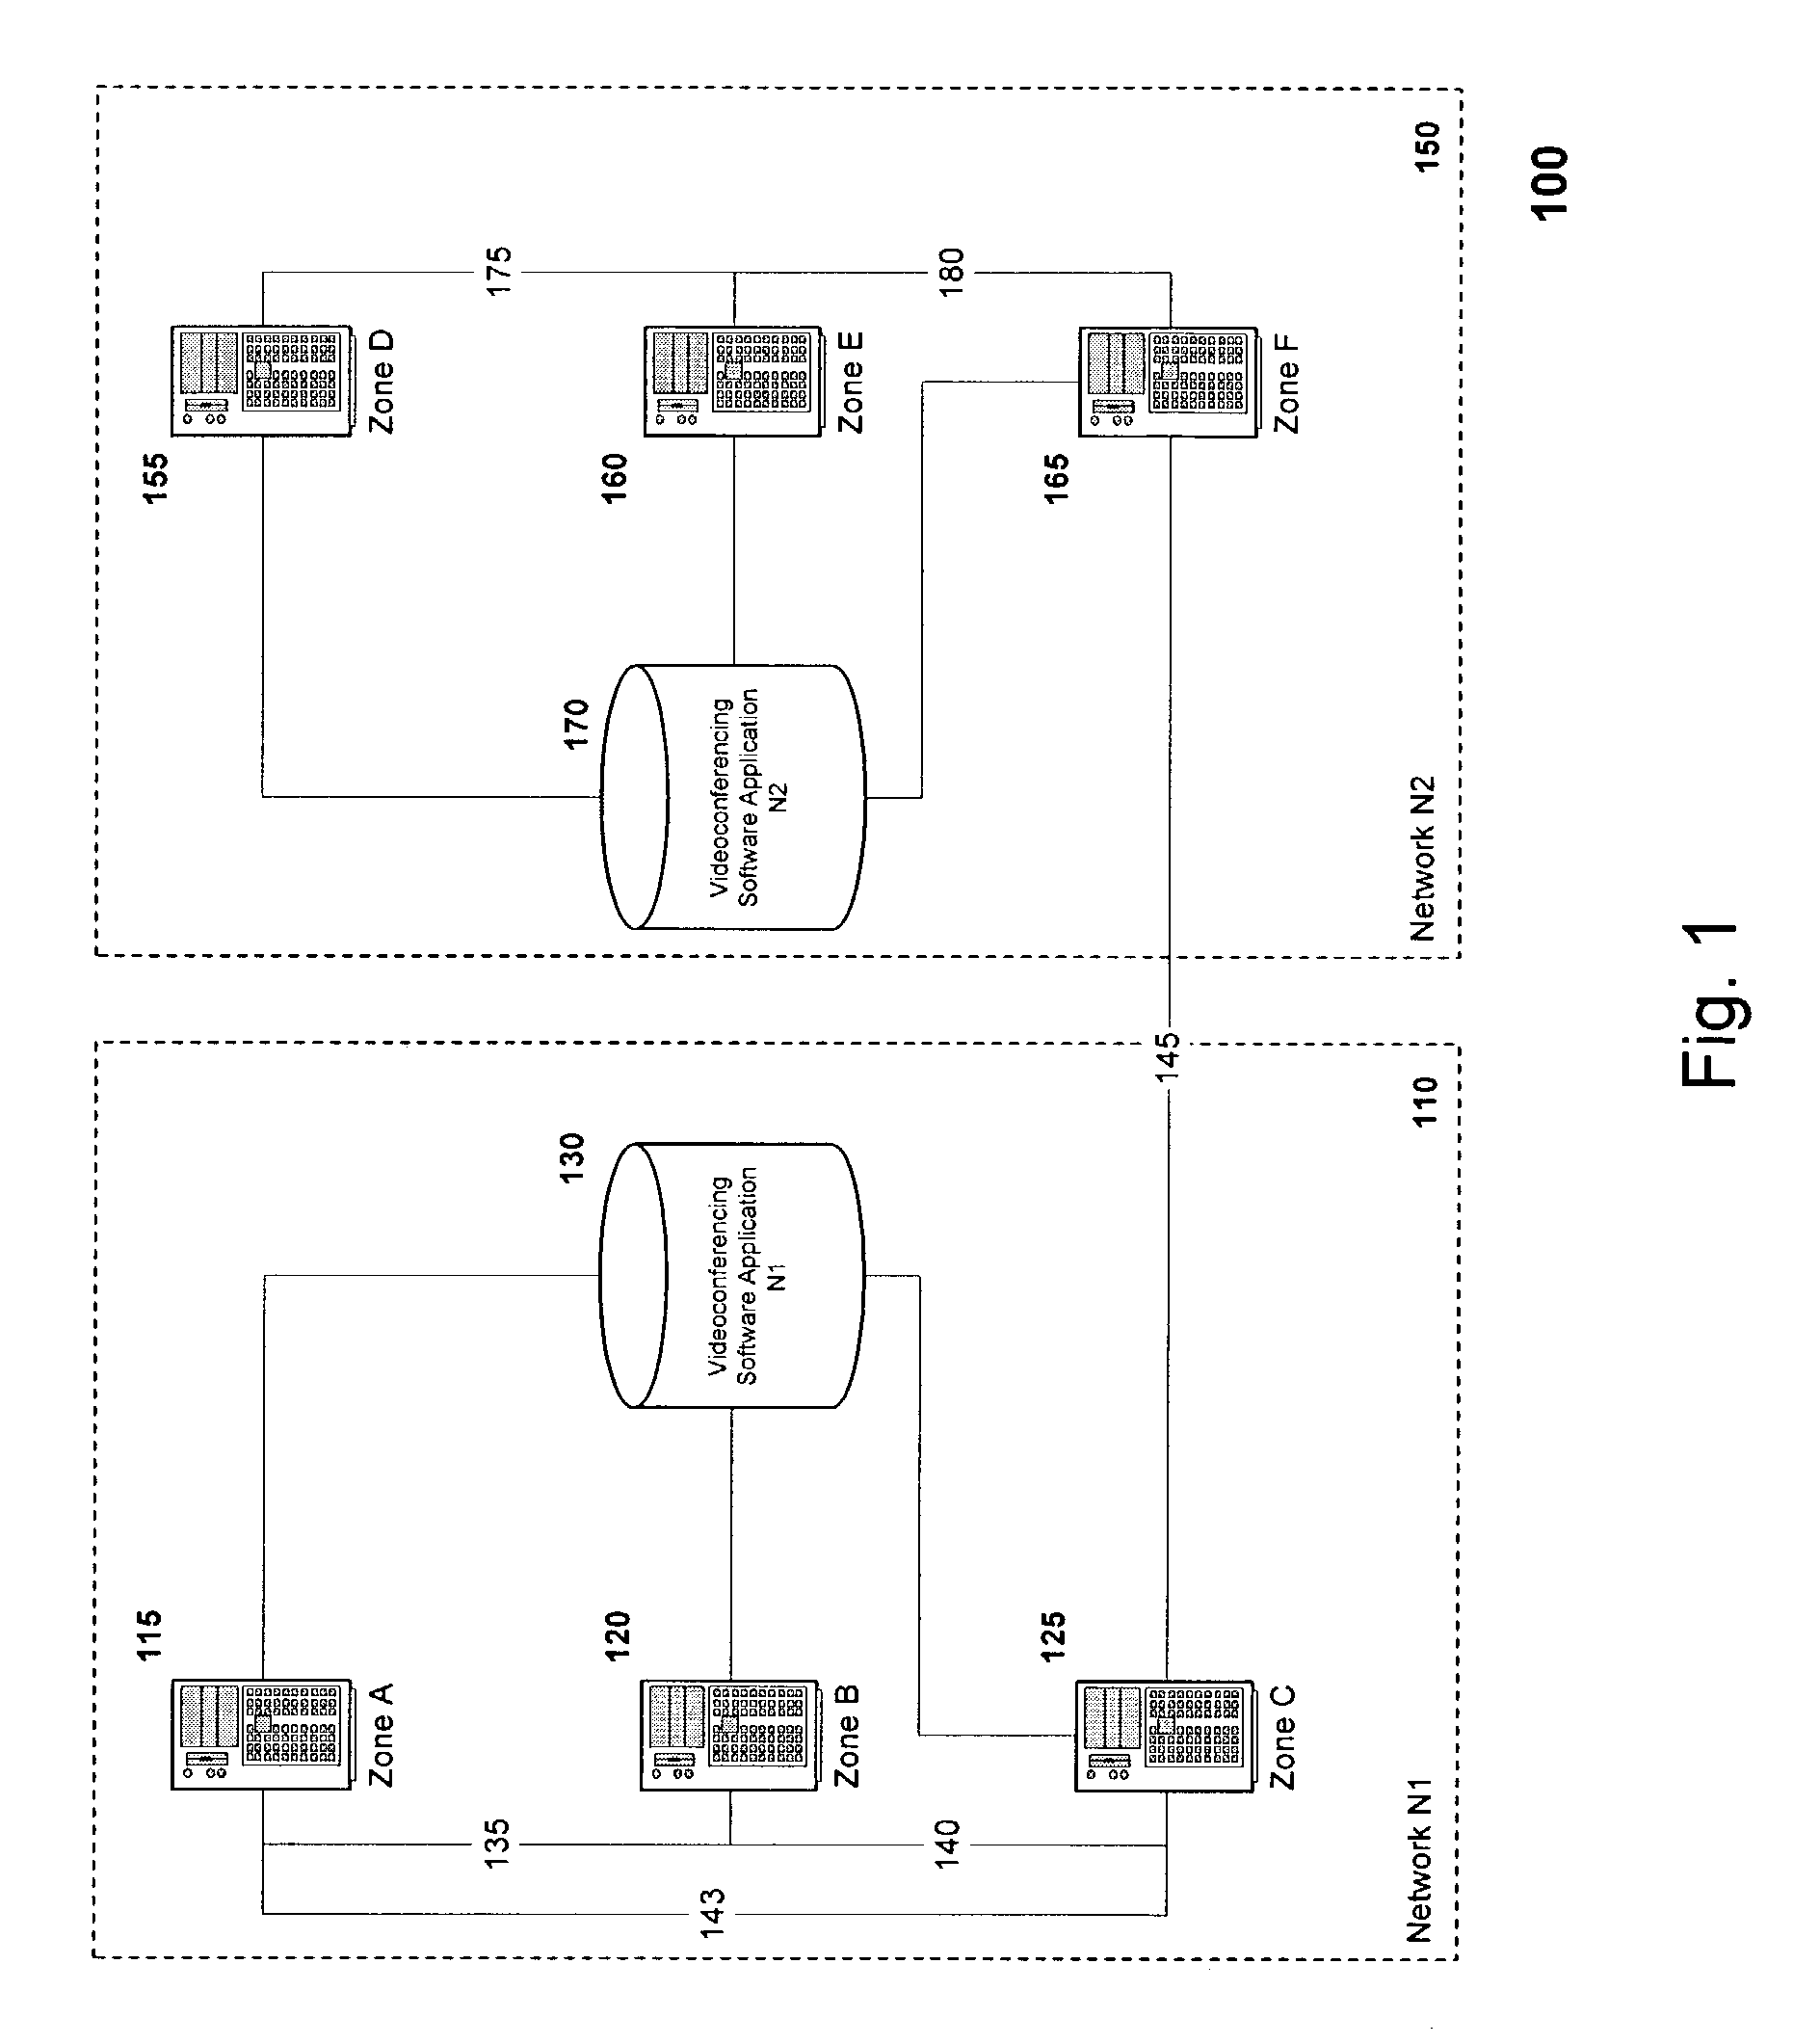 Method and means for providing scheduling for a videoconferencing network in a manner to ensure bandwidth